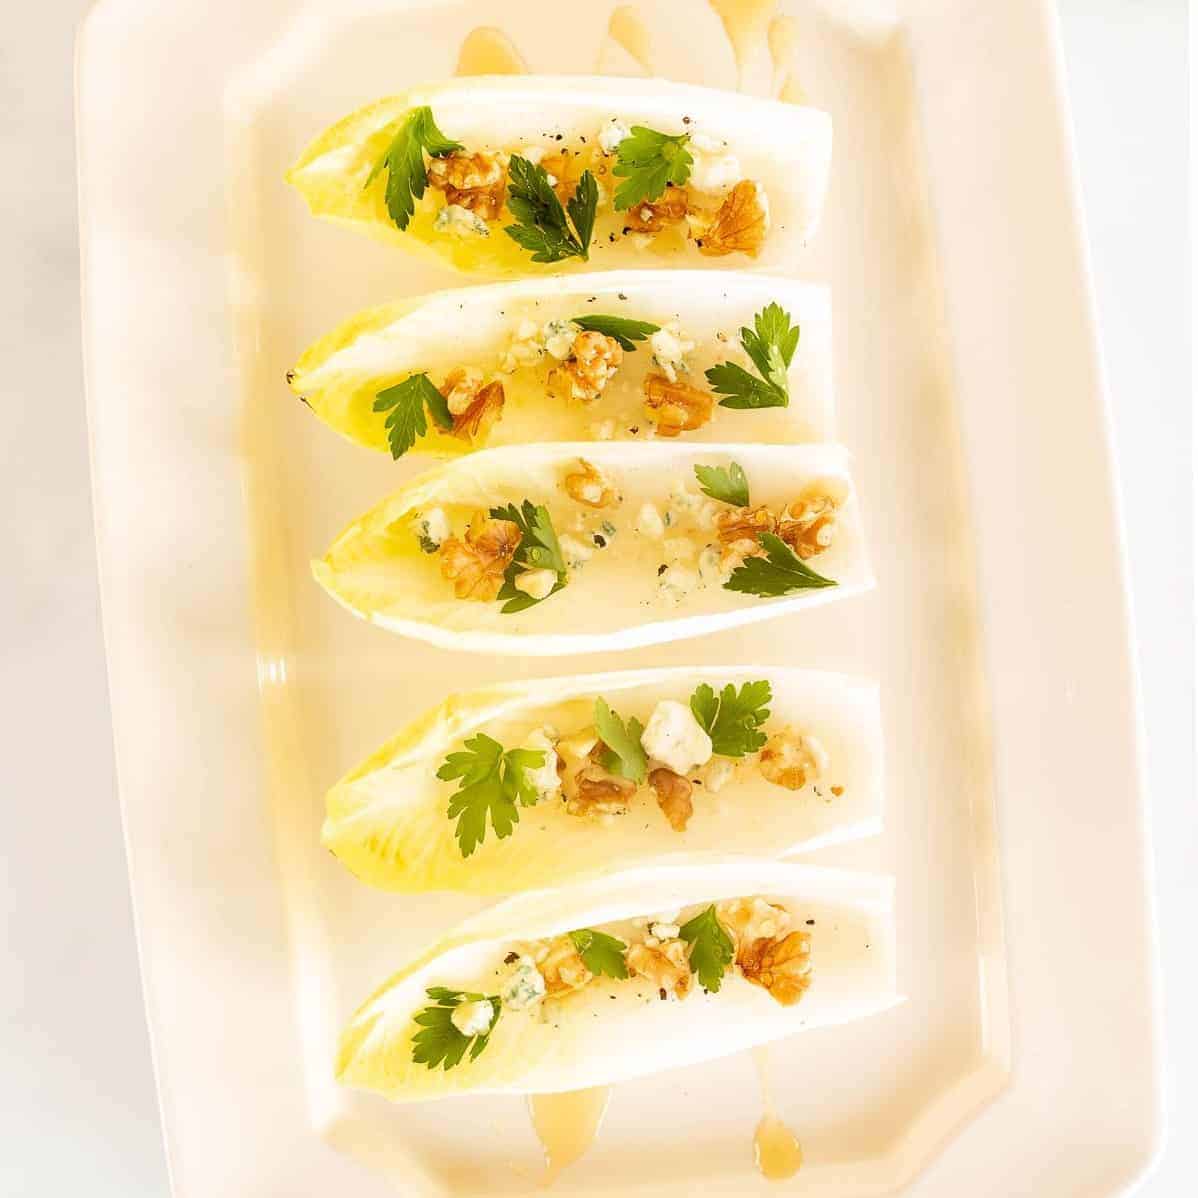 A white platter with individual endive lettuce leaves, filled with nuts, cheese and more for an endive salad appetizer.